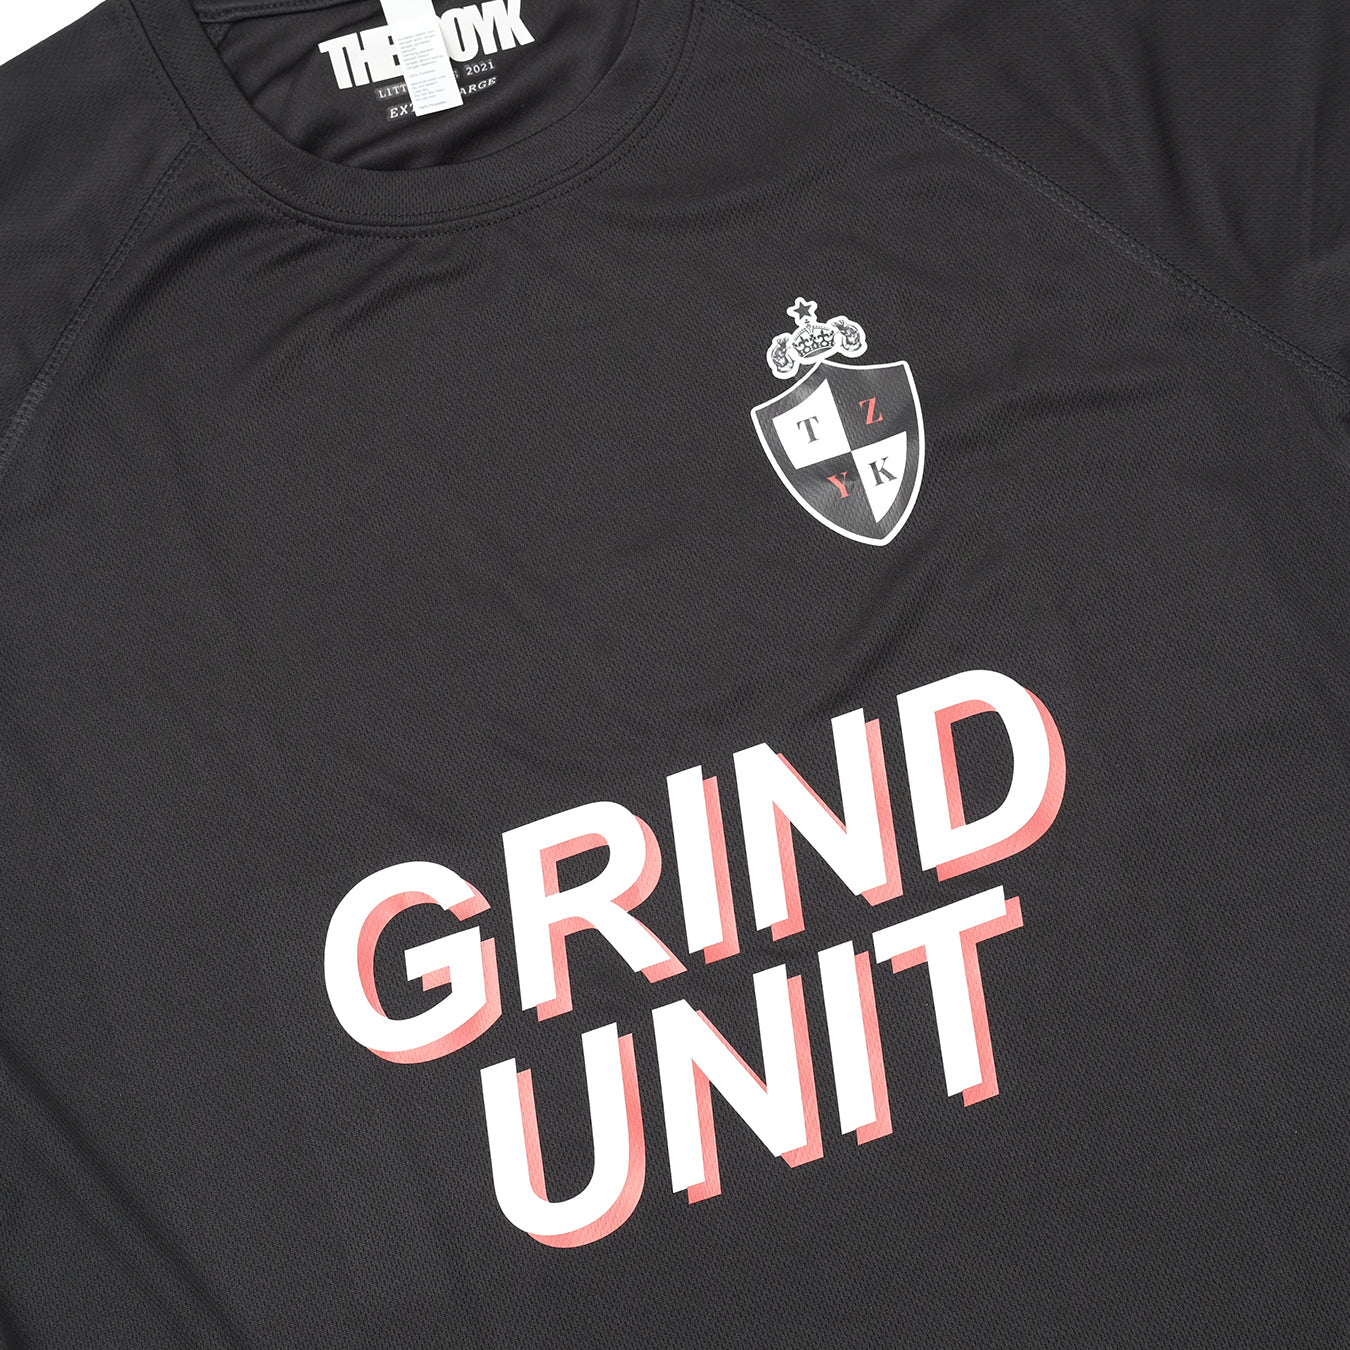 THEZOOYK - Grind Unit Dry-Fit Jersey/Black